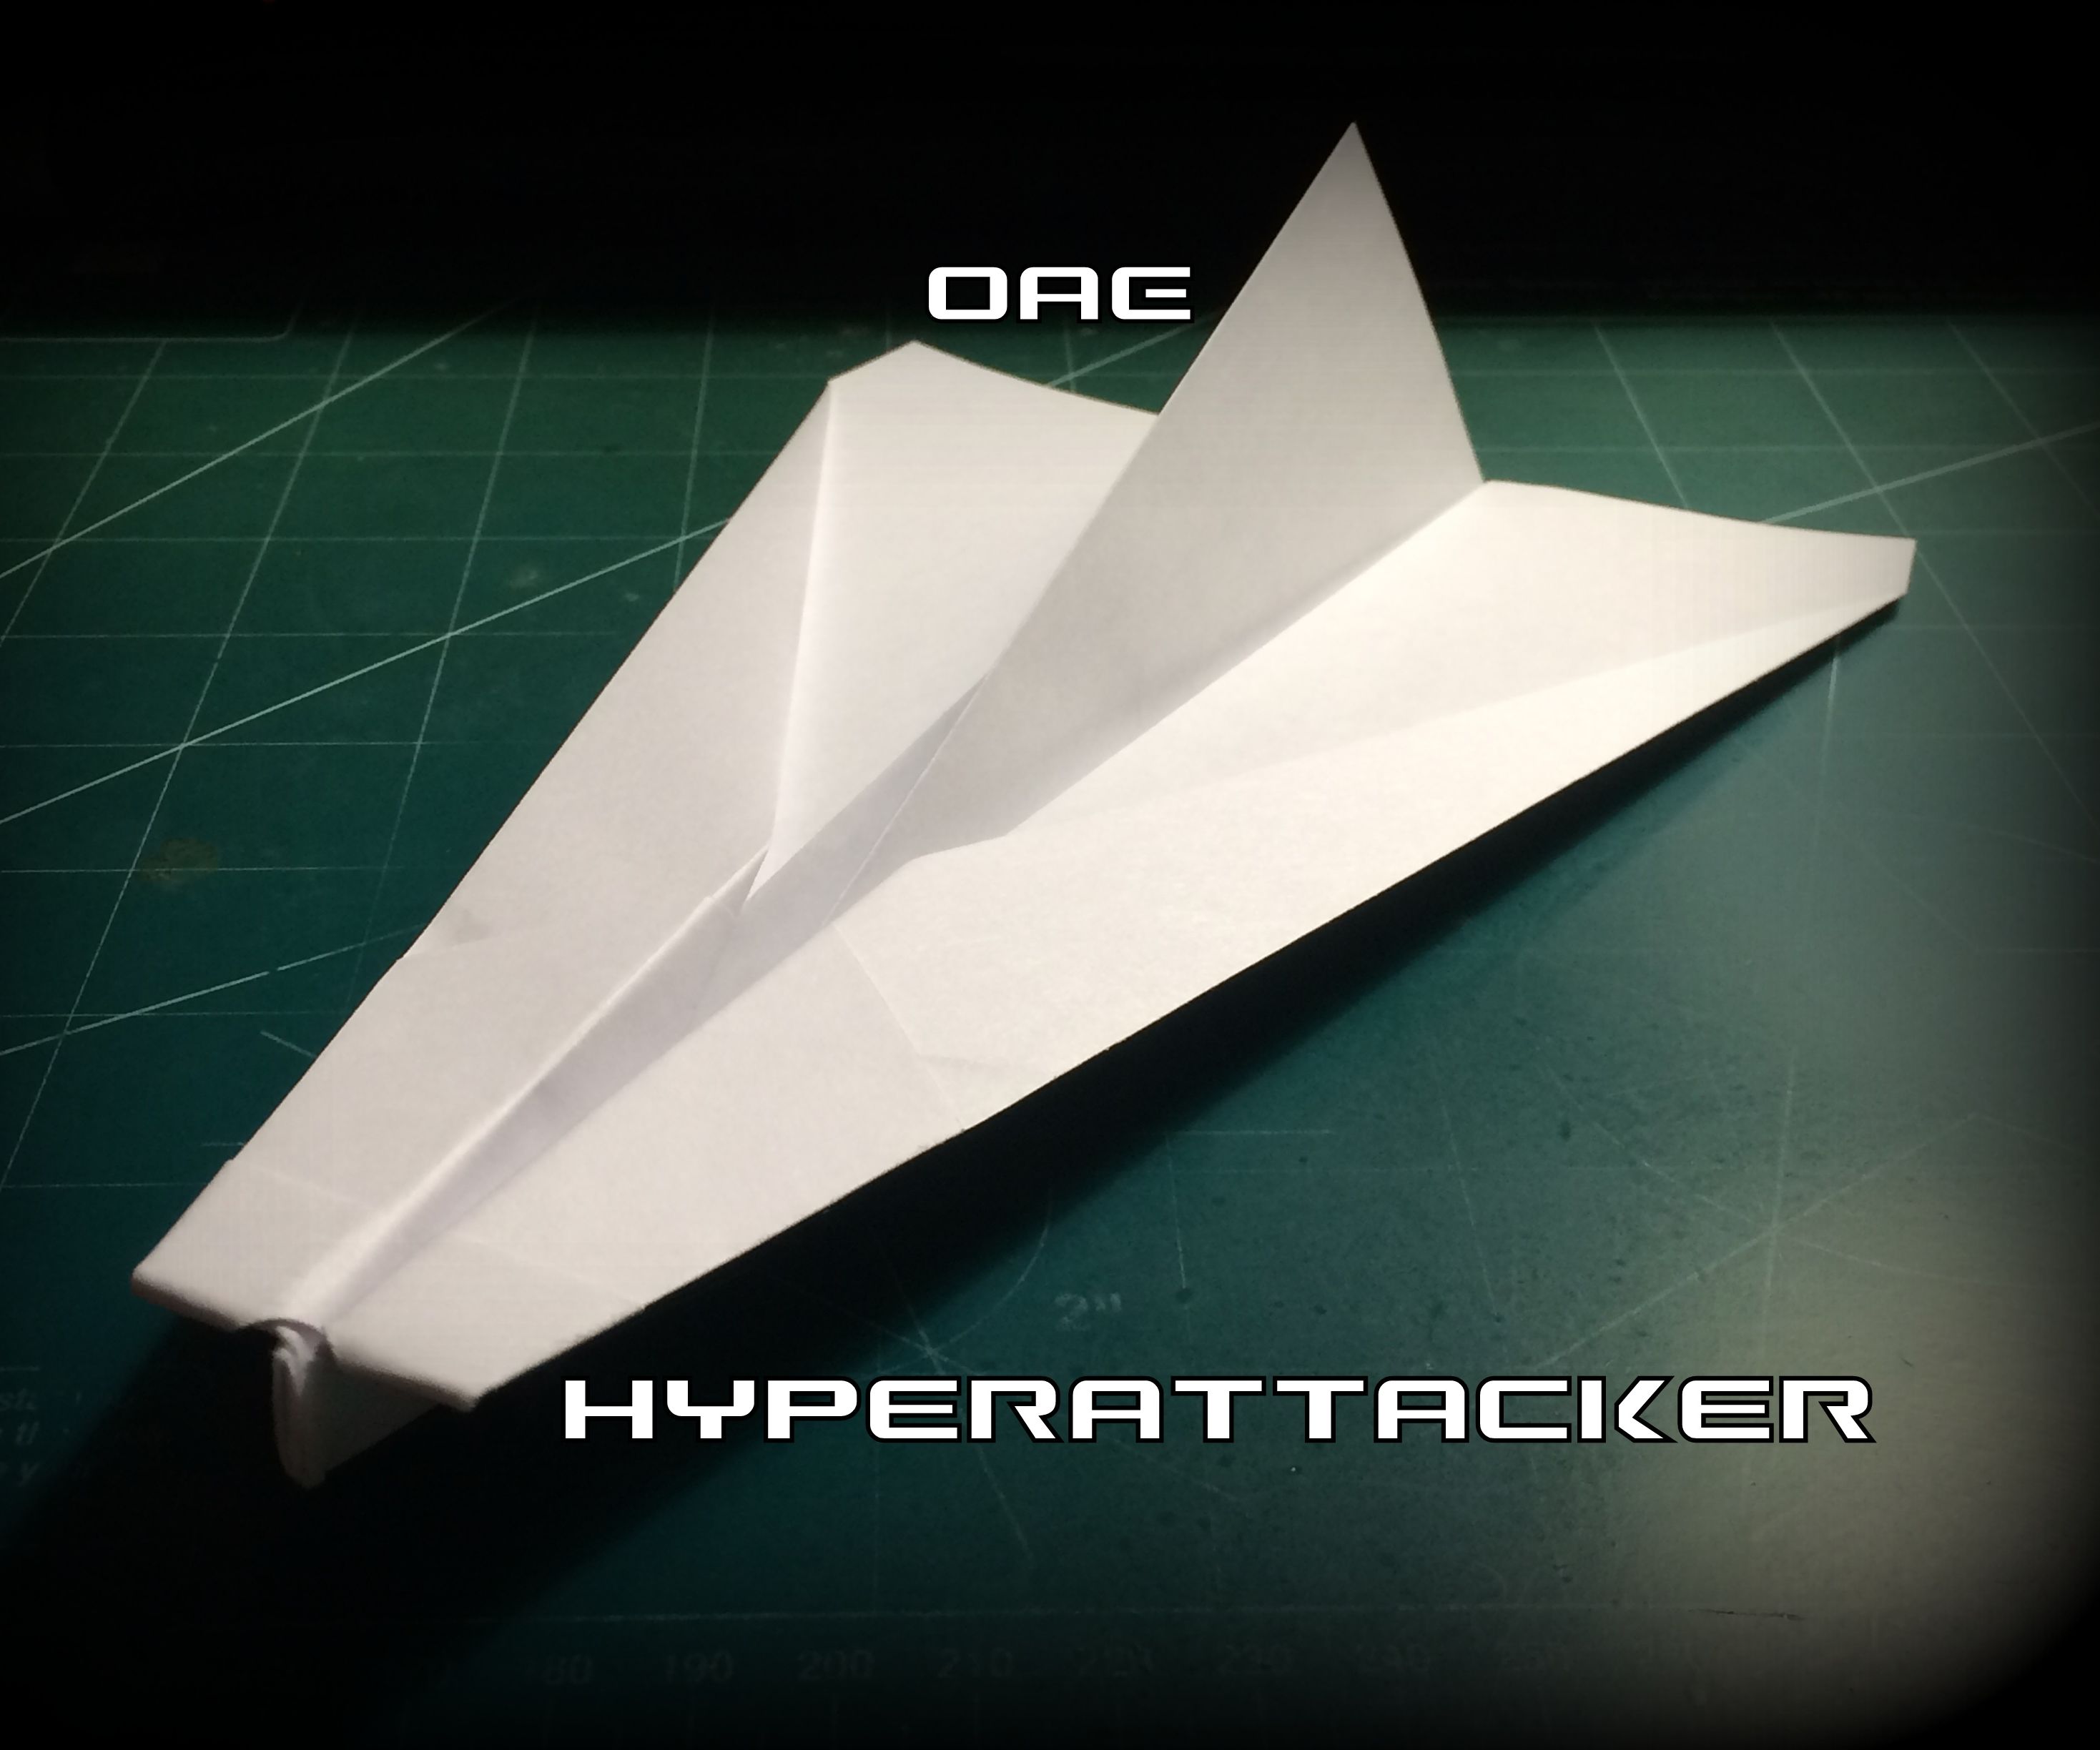 How to Make the HyperAttacker Paper Airplane